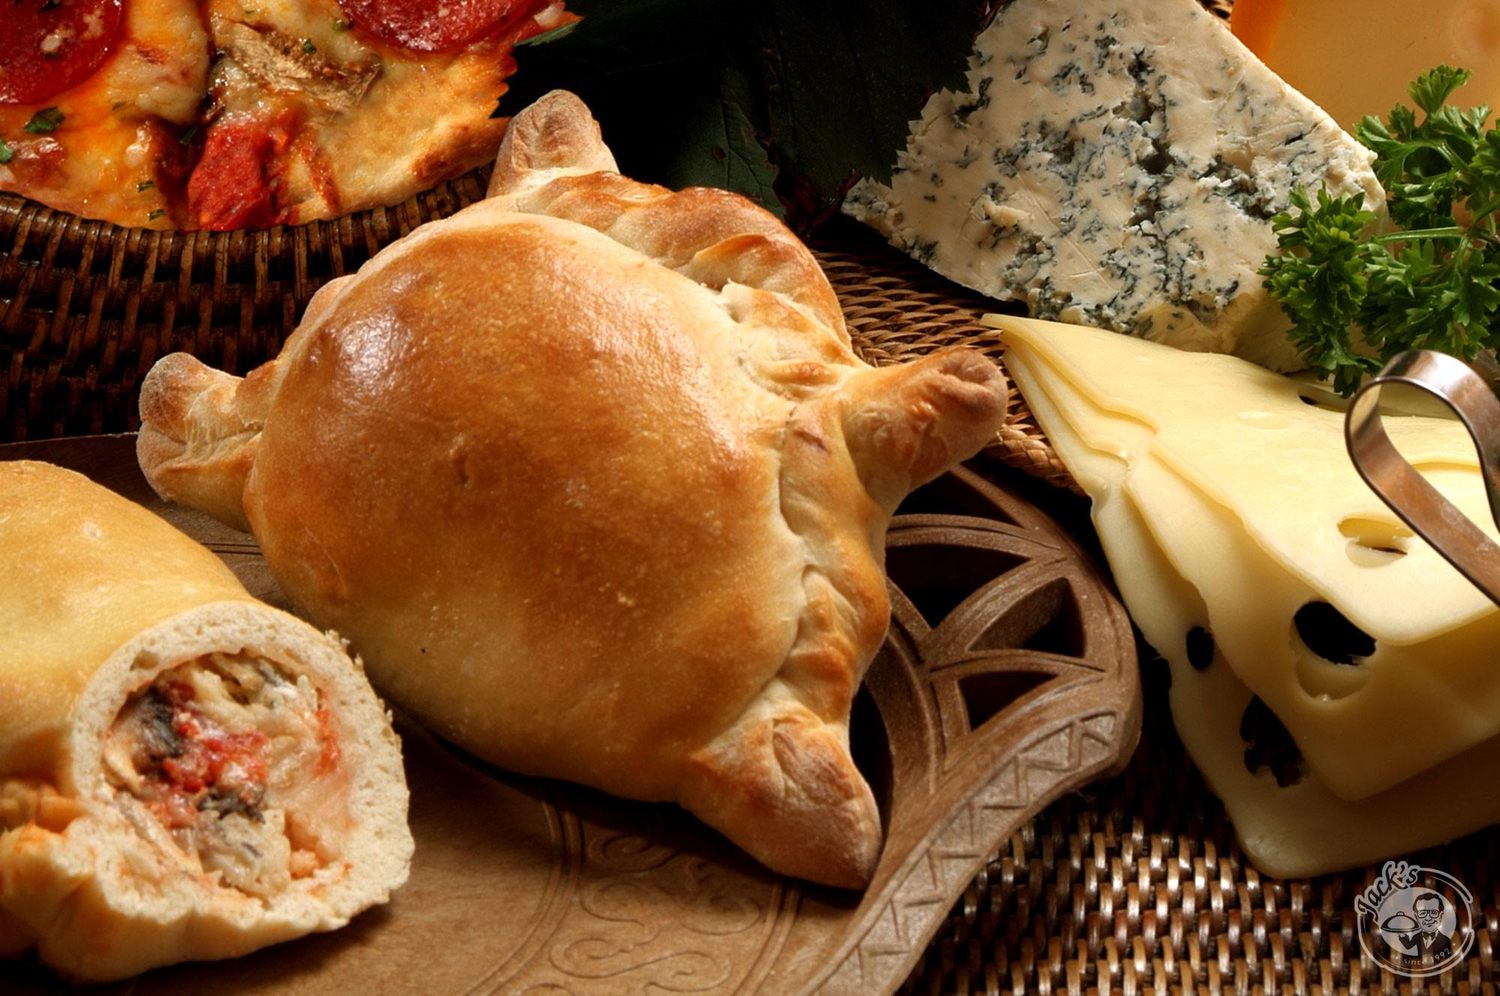 Calzone "Benevento" stuffed with succulent mushrooms 380 g